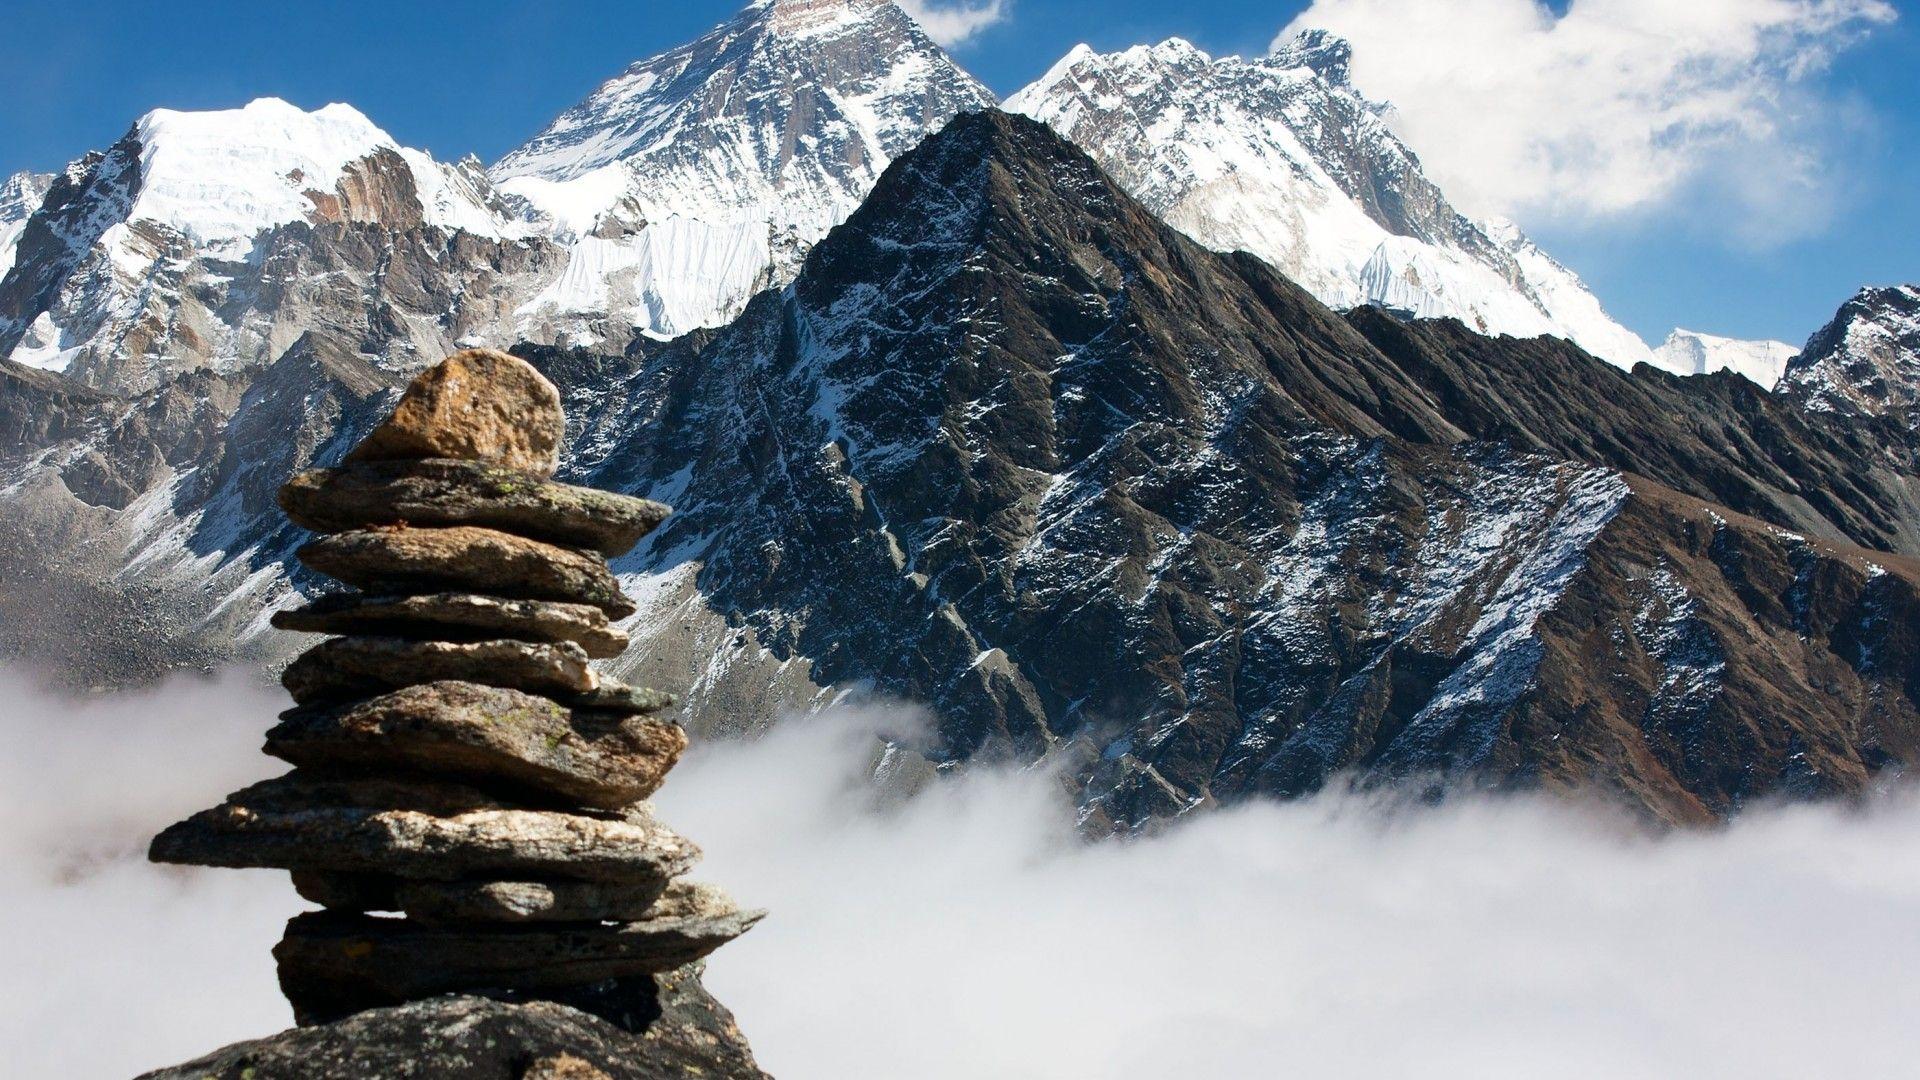 Nepal Photos, Download The BEST Free Nepal Stock Photos & HD Images